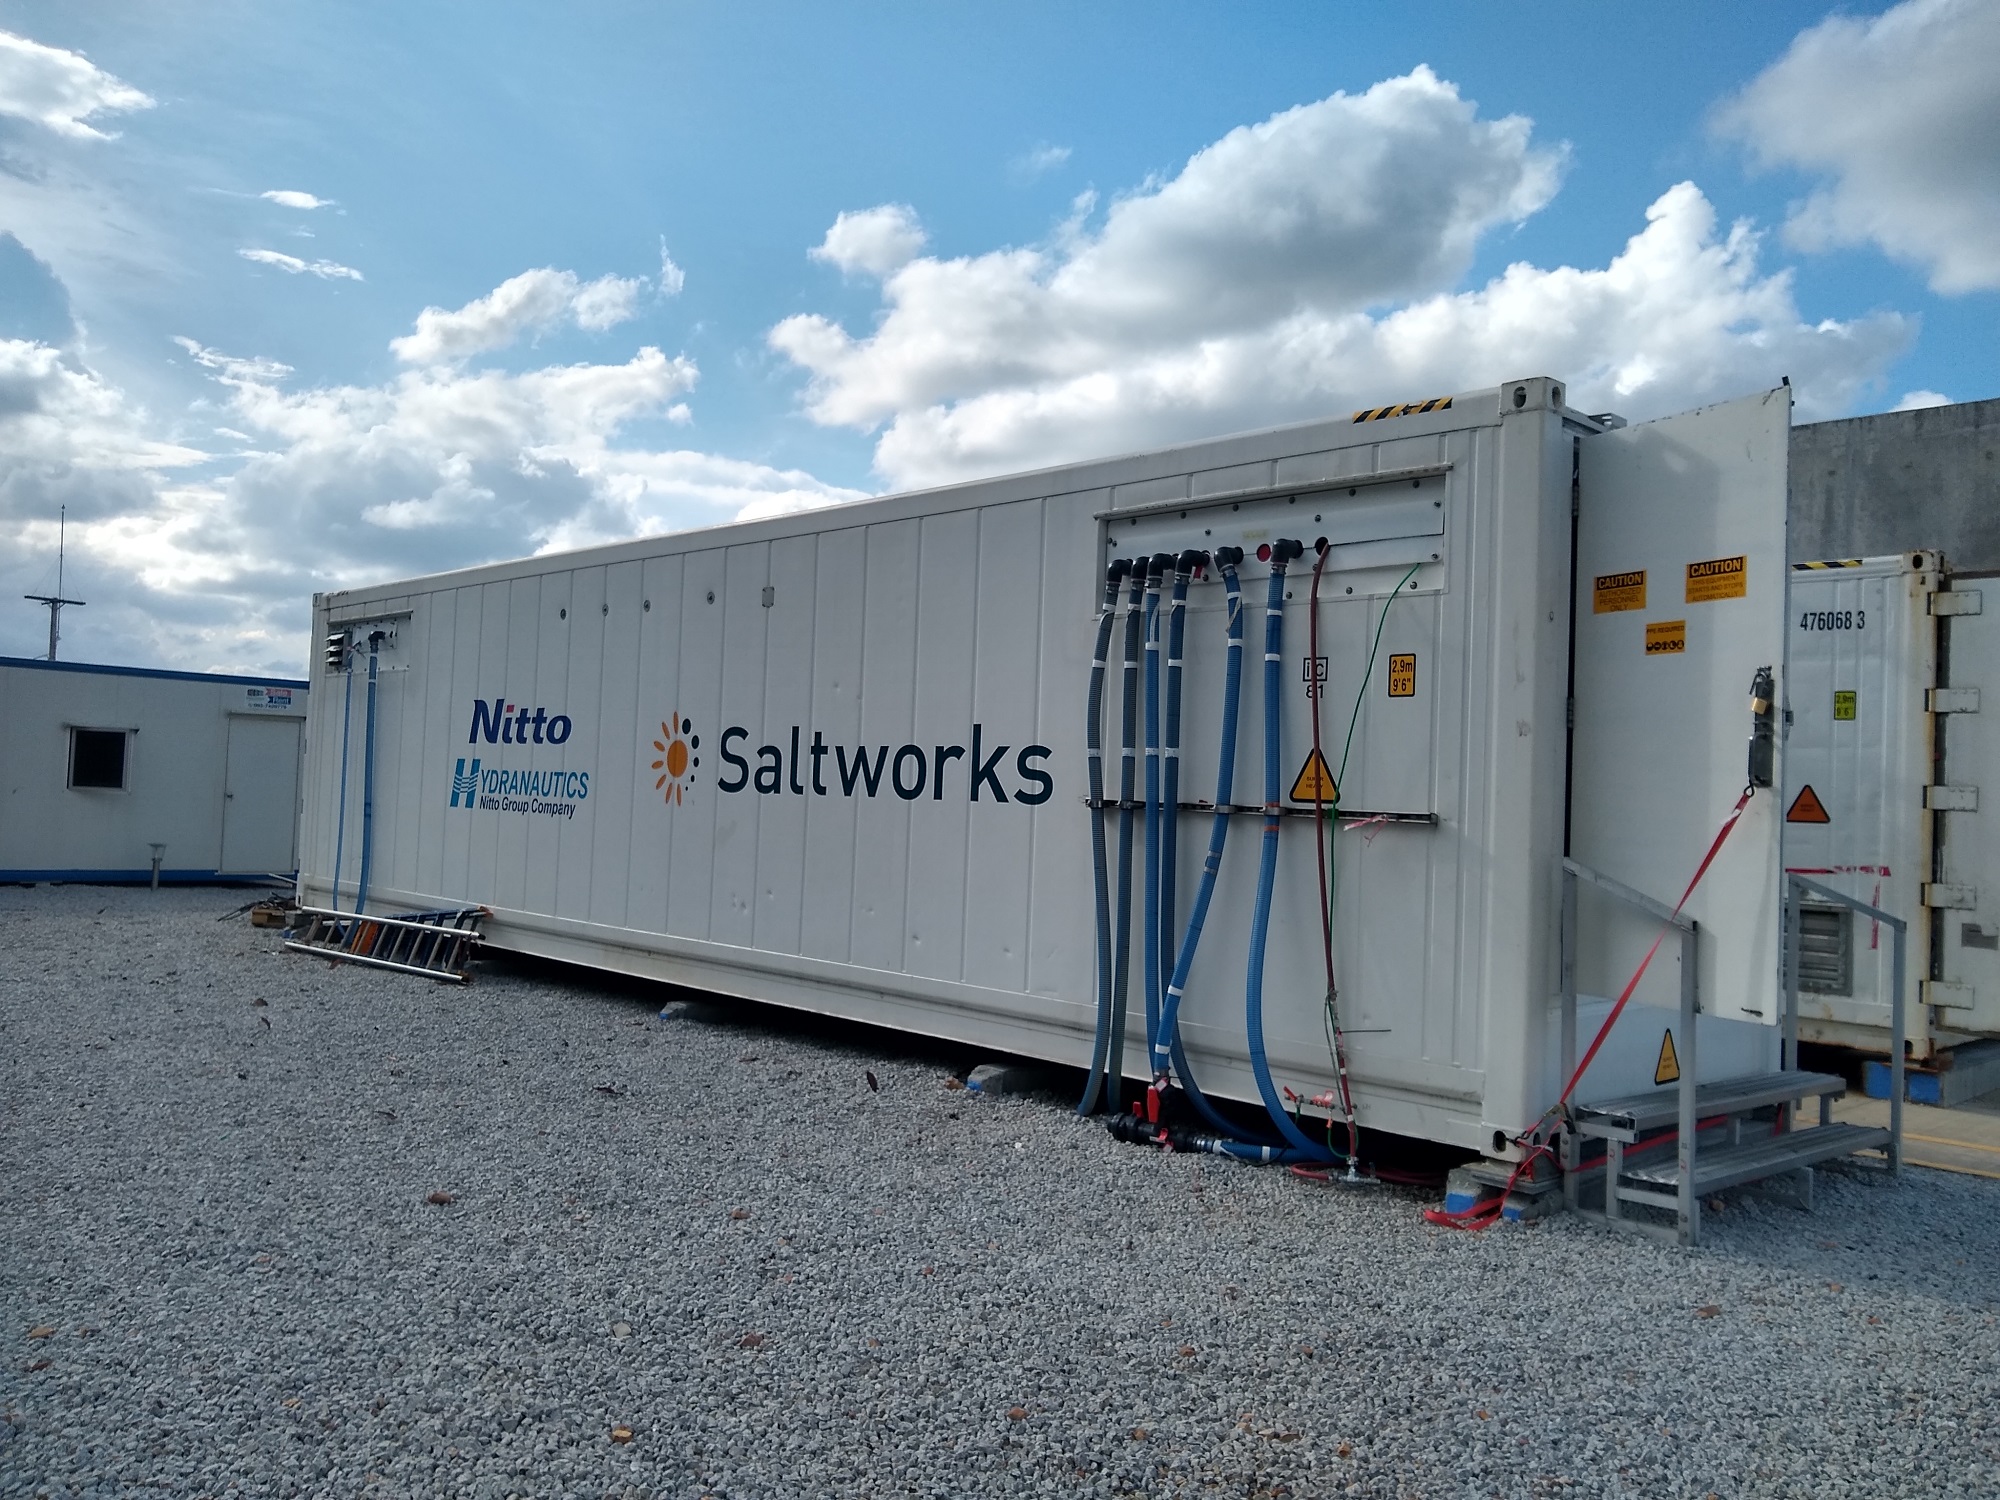 The Saltworks’ team operated the plant both on-site and remotely despite the ongoing international challenges of the Covid-19 pandemic.